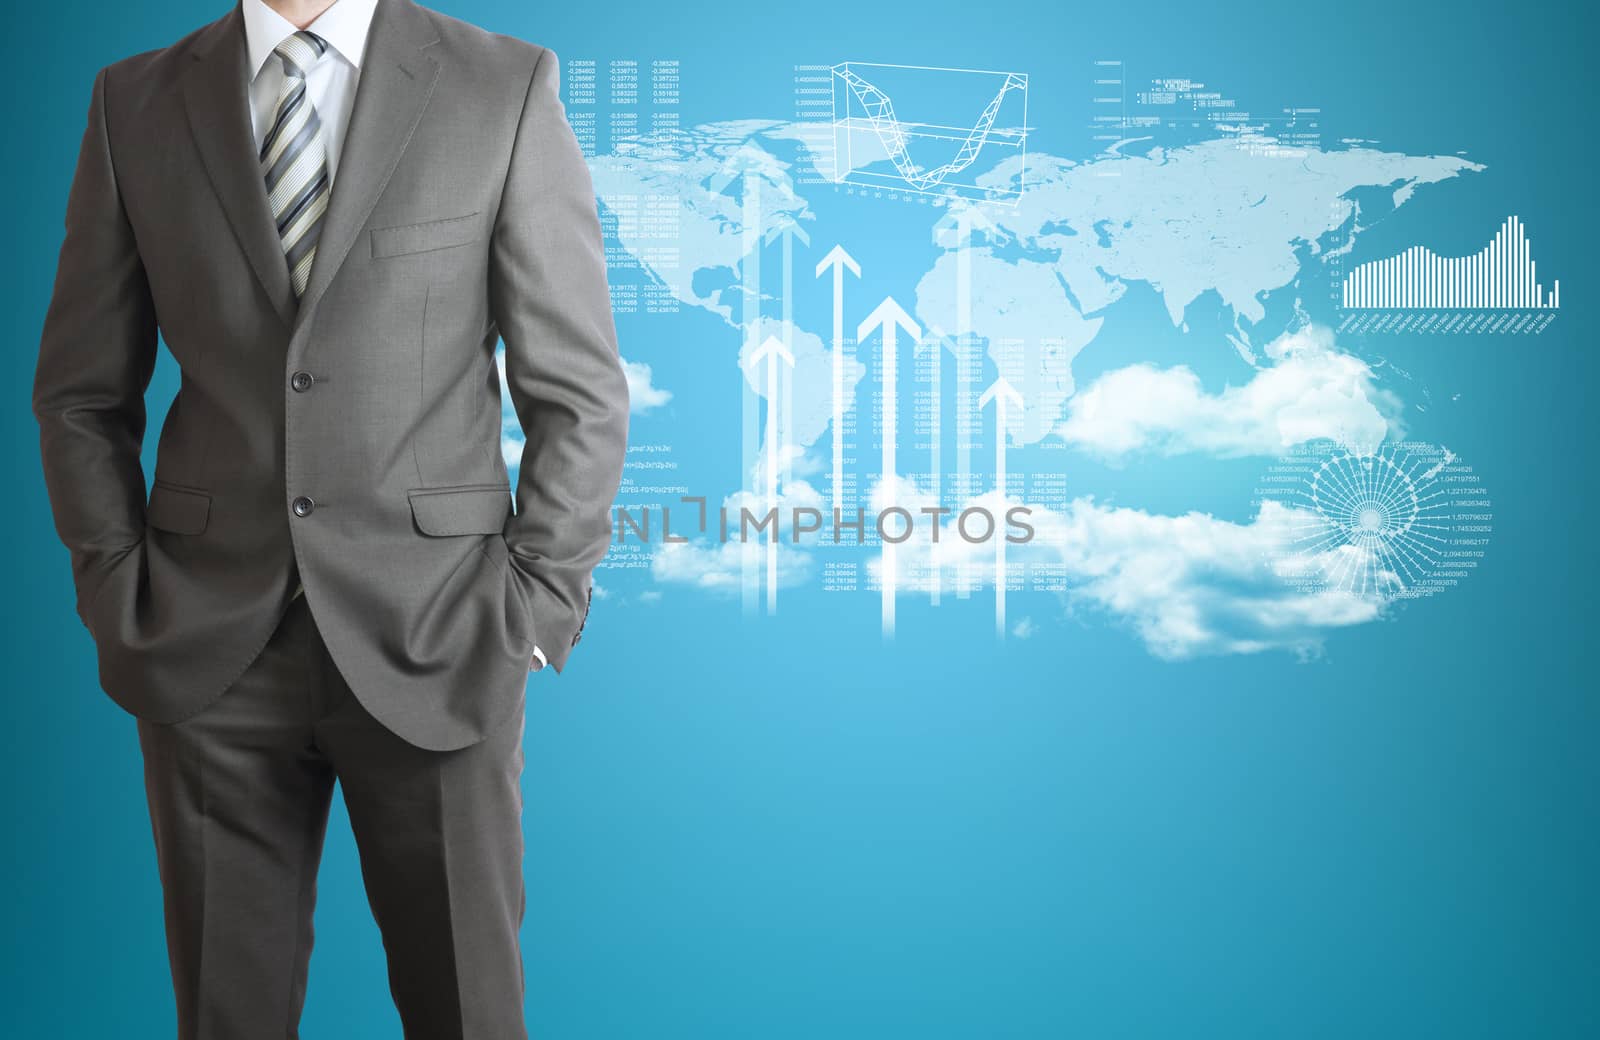 Businessman in suit. World map, clouds, and graphs as backdrop